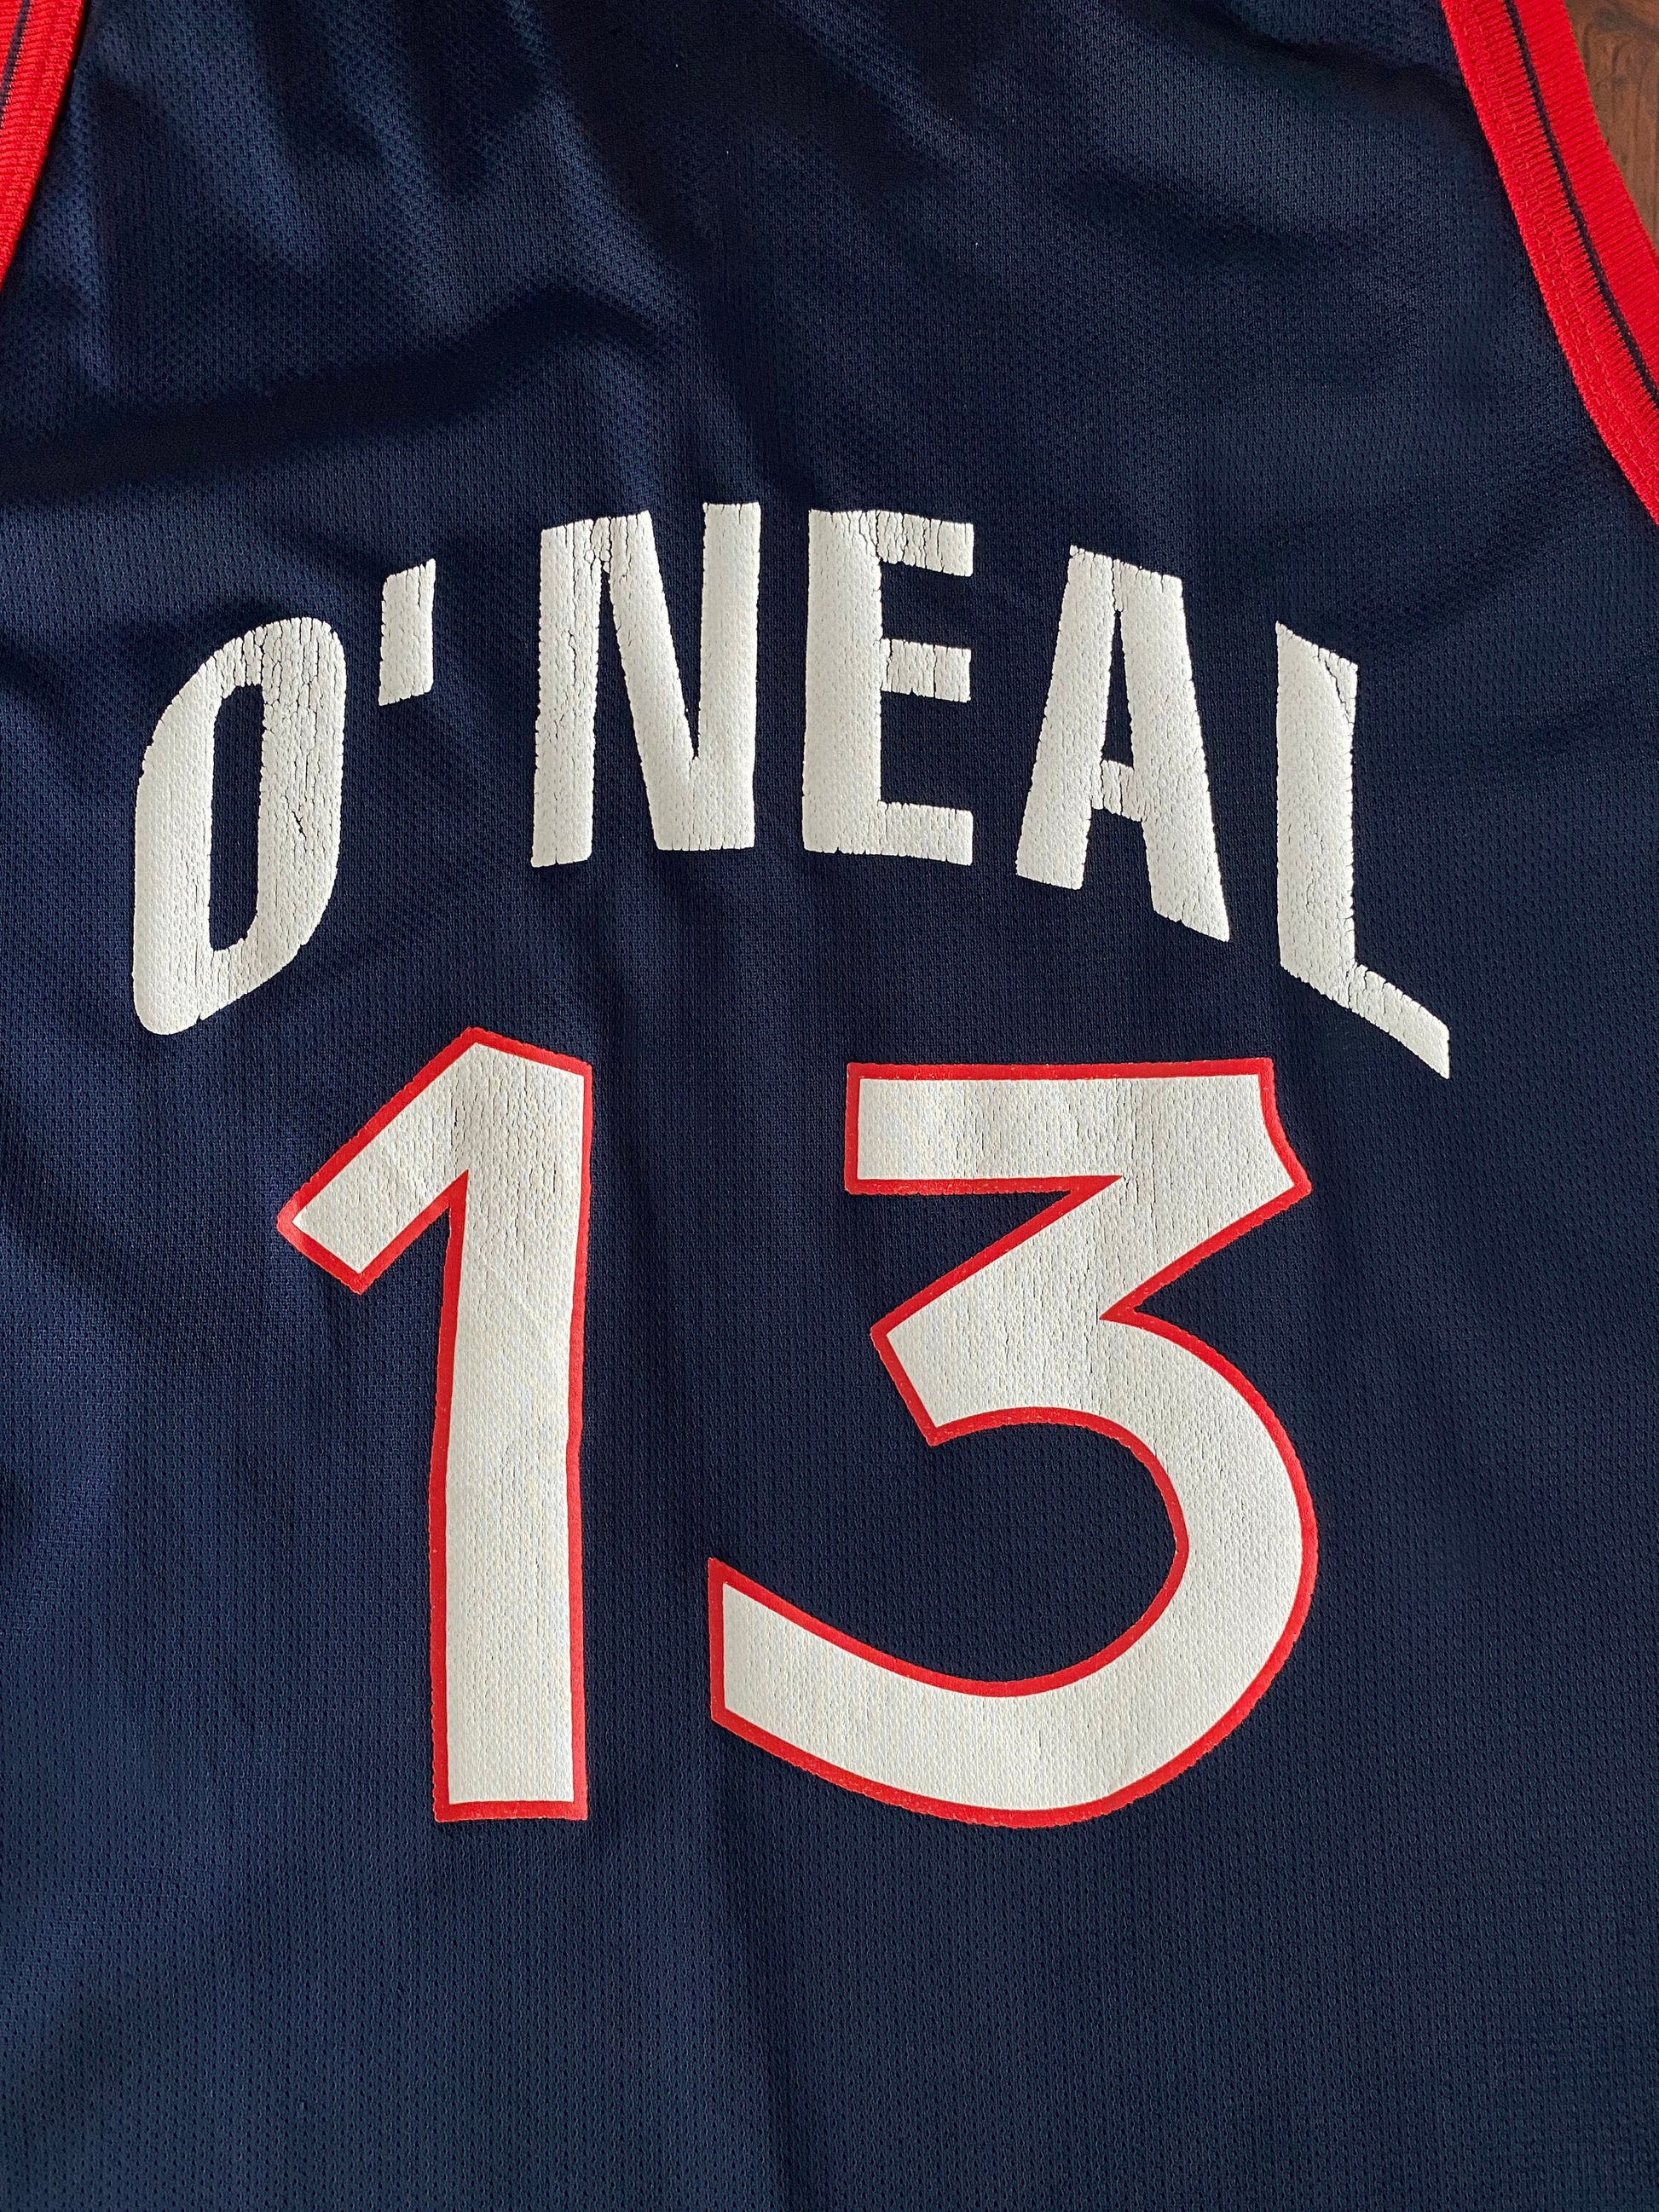 Vintage 90s NBA Champion USA Olympics Dream Team jersey, size 44, featuring Shaq O'Neal #13 - back view. Made in USA.